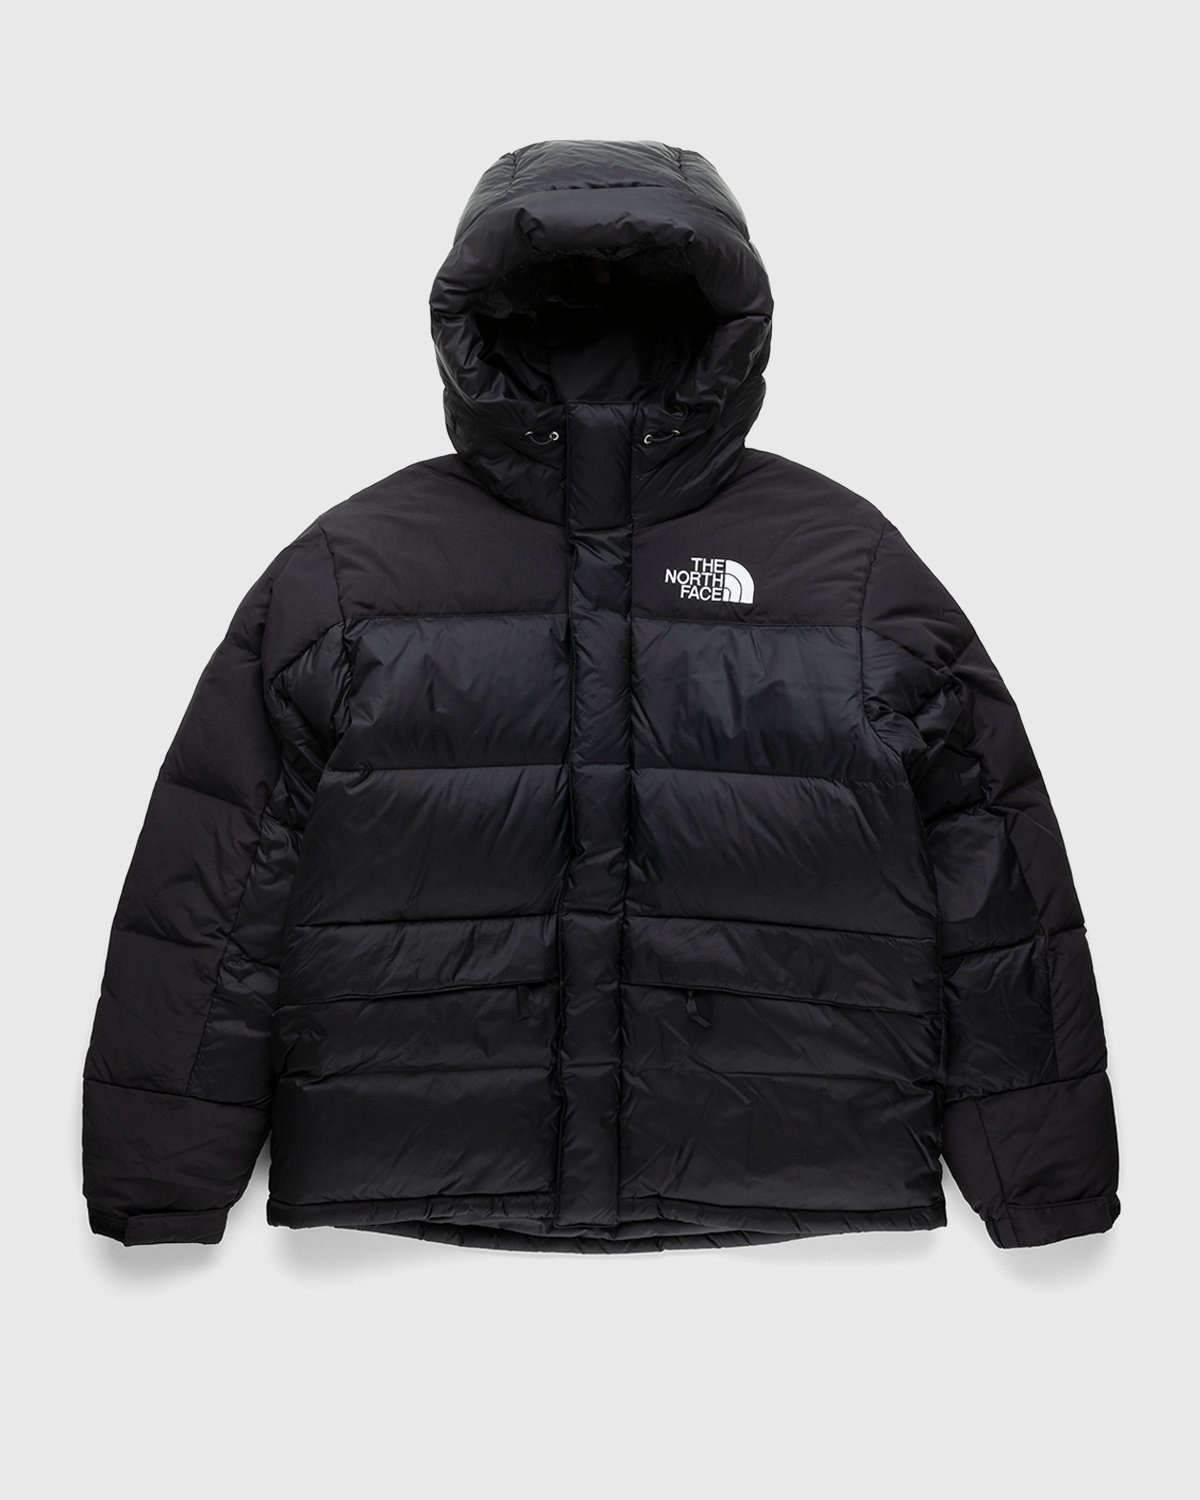 The North Face By Any Means Mountain Jacket Black FW15 🥶🥶, Men's Fashion,  Coats, Jackets and Outerwear on Carousell